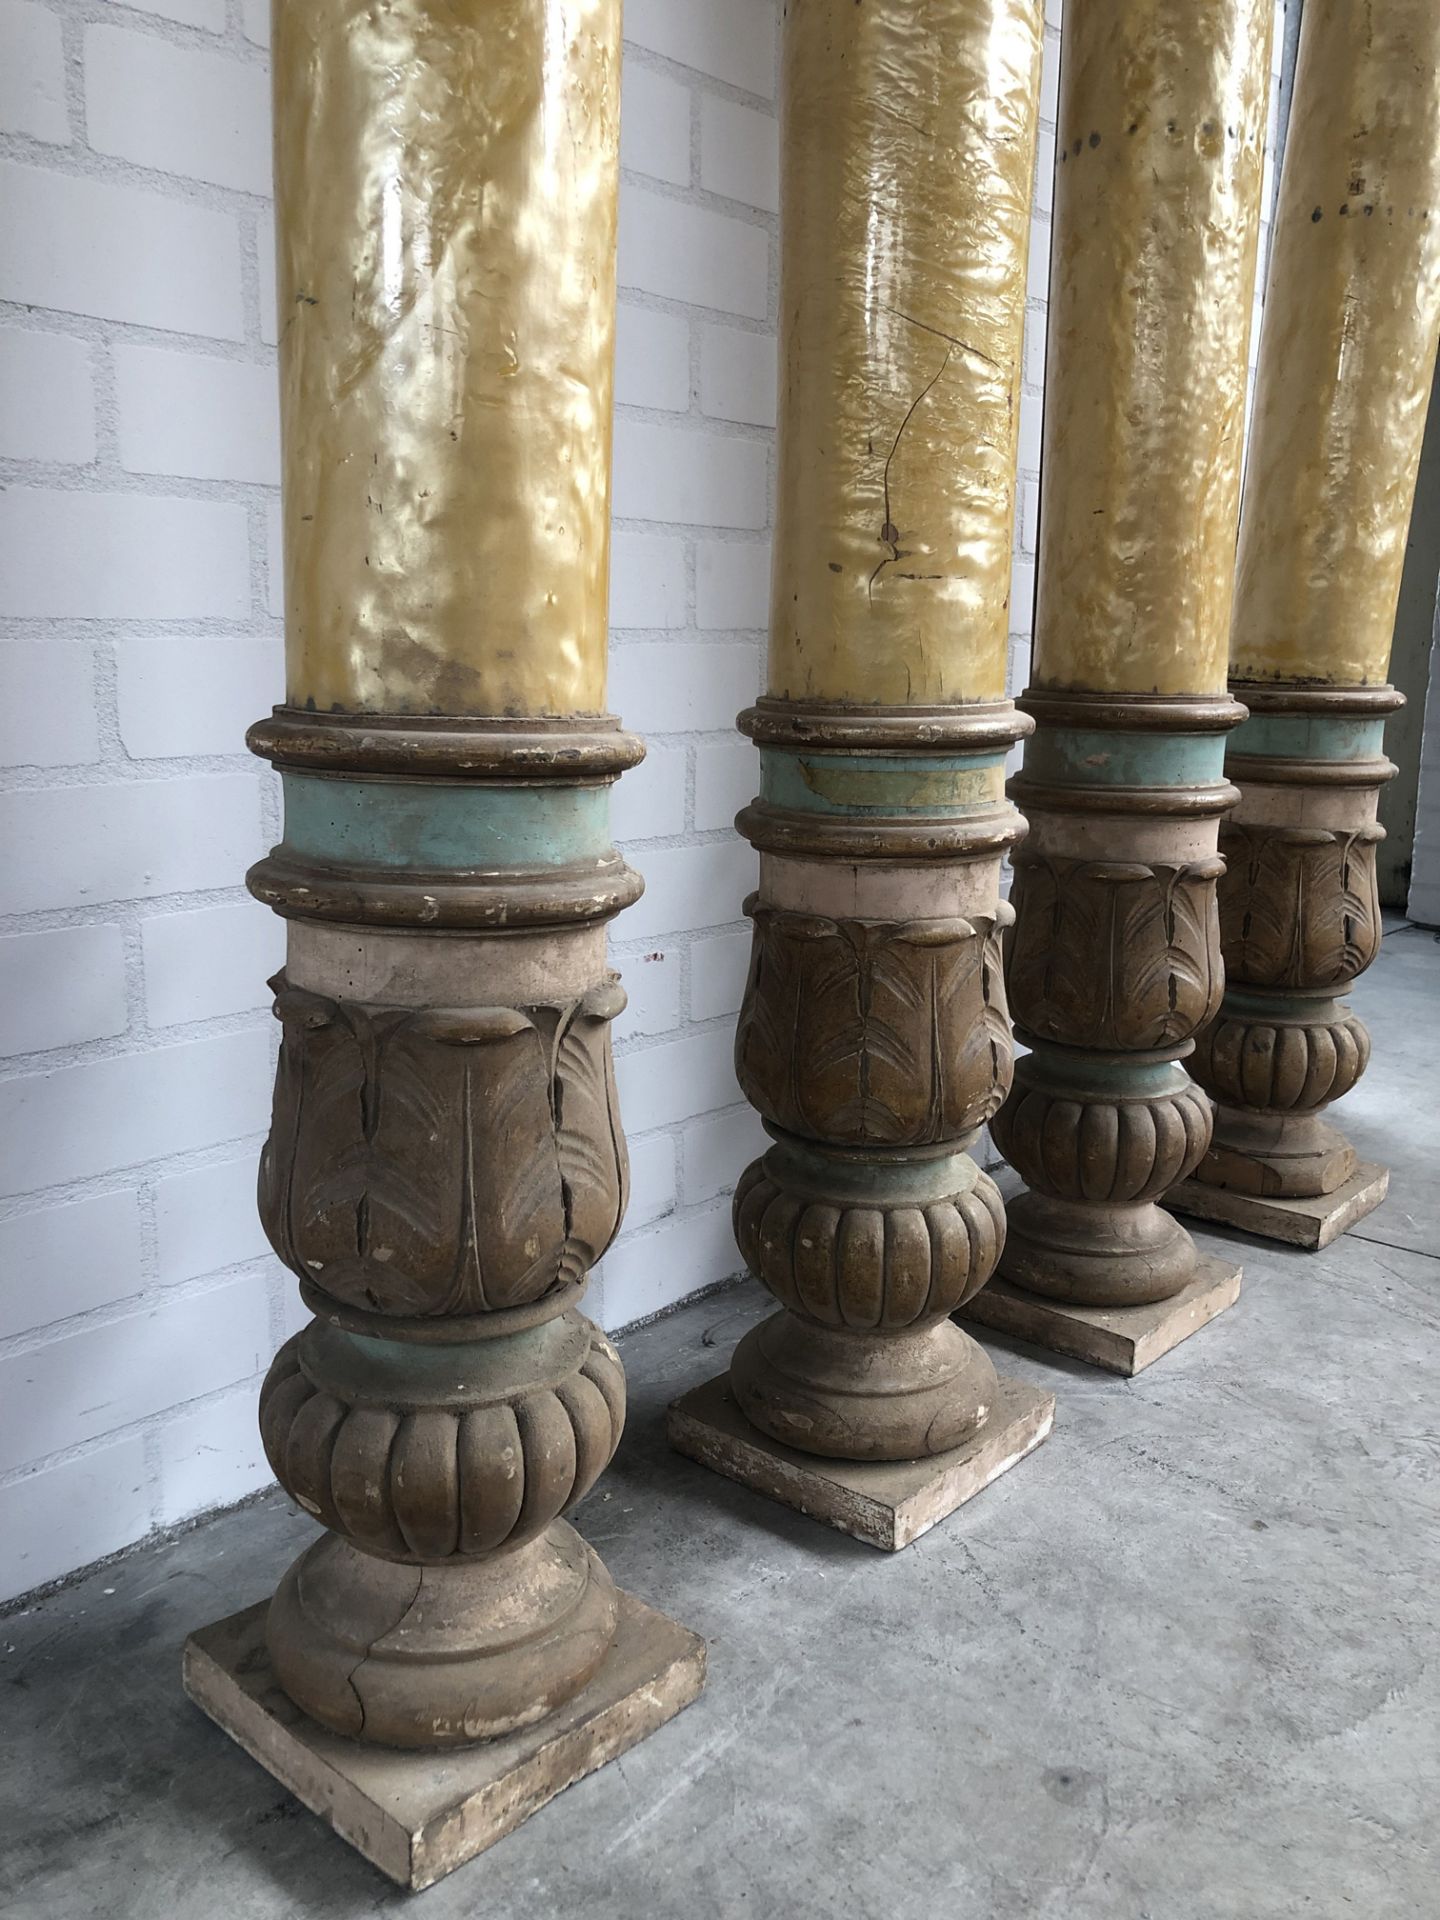 Set of 4 Wooden Pillars from a Carousel or an Organ - Image 5 of 6